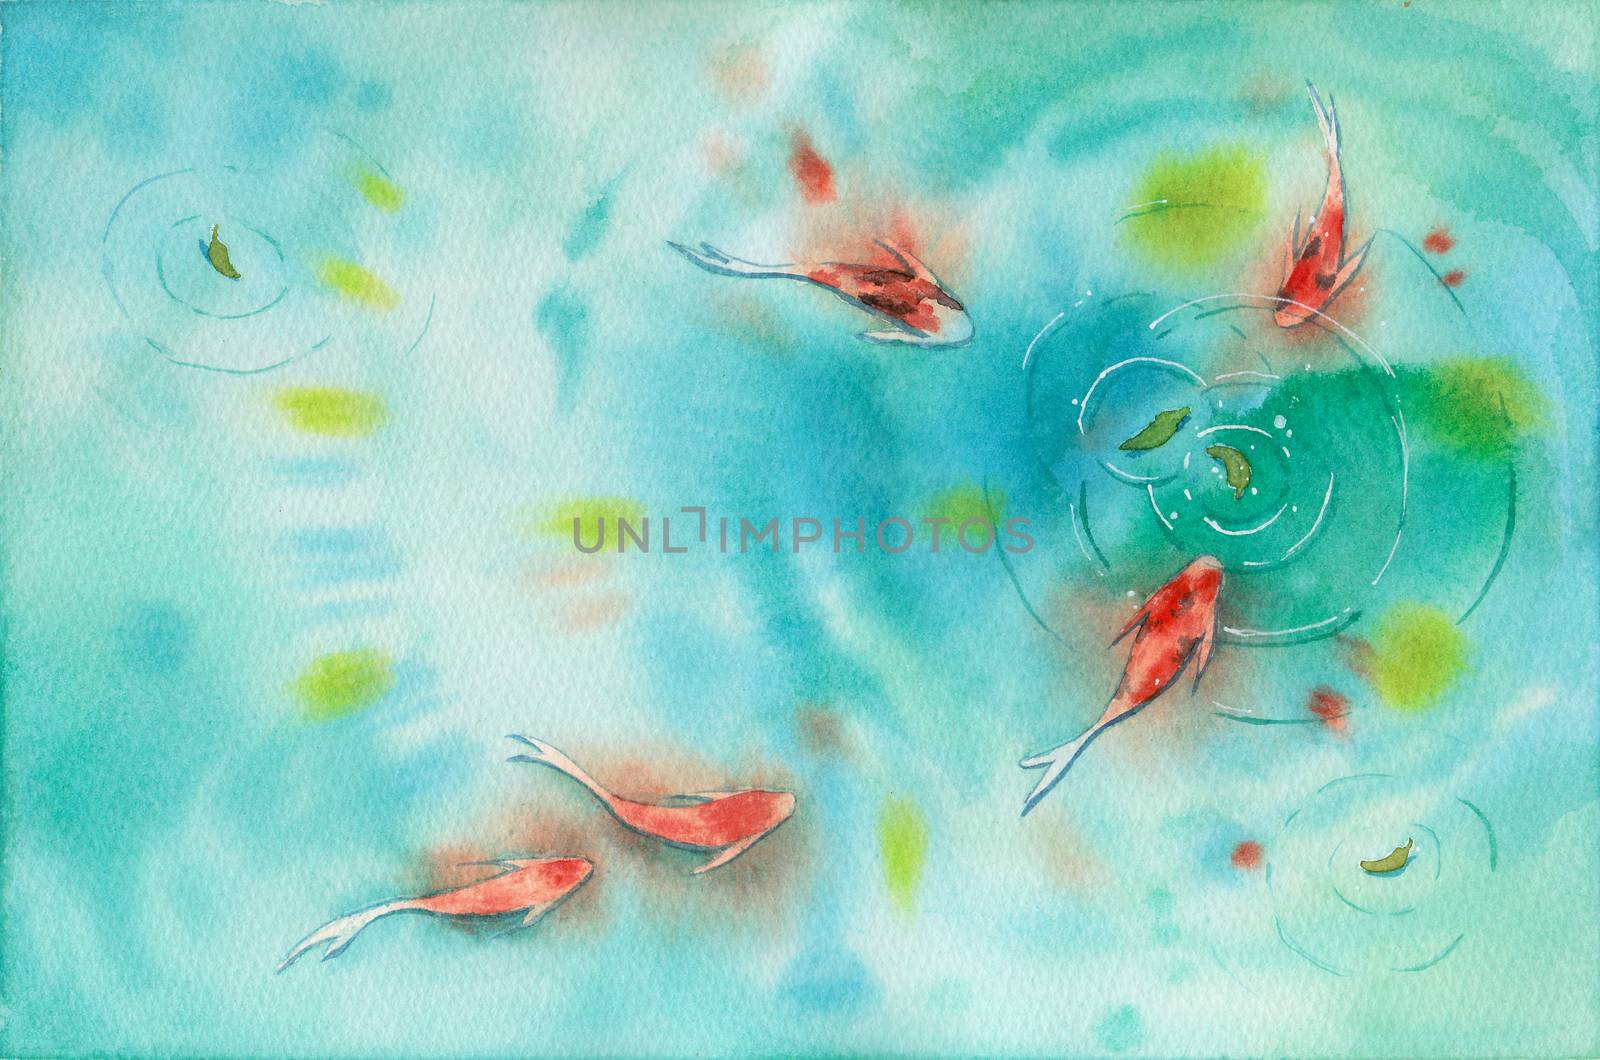 Watercolor hand painting, koi carp fish in pond, symbol of good luck and prosperity by Ungamrung